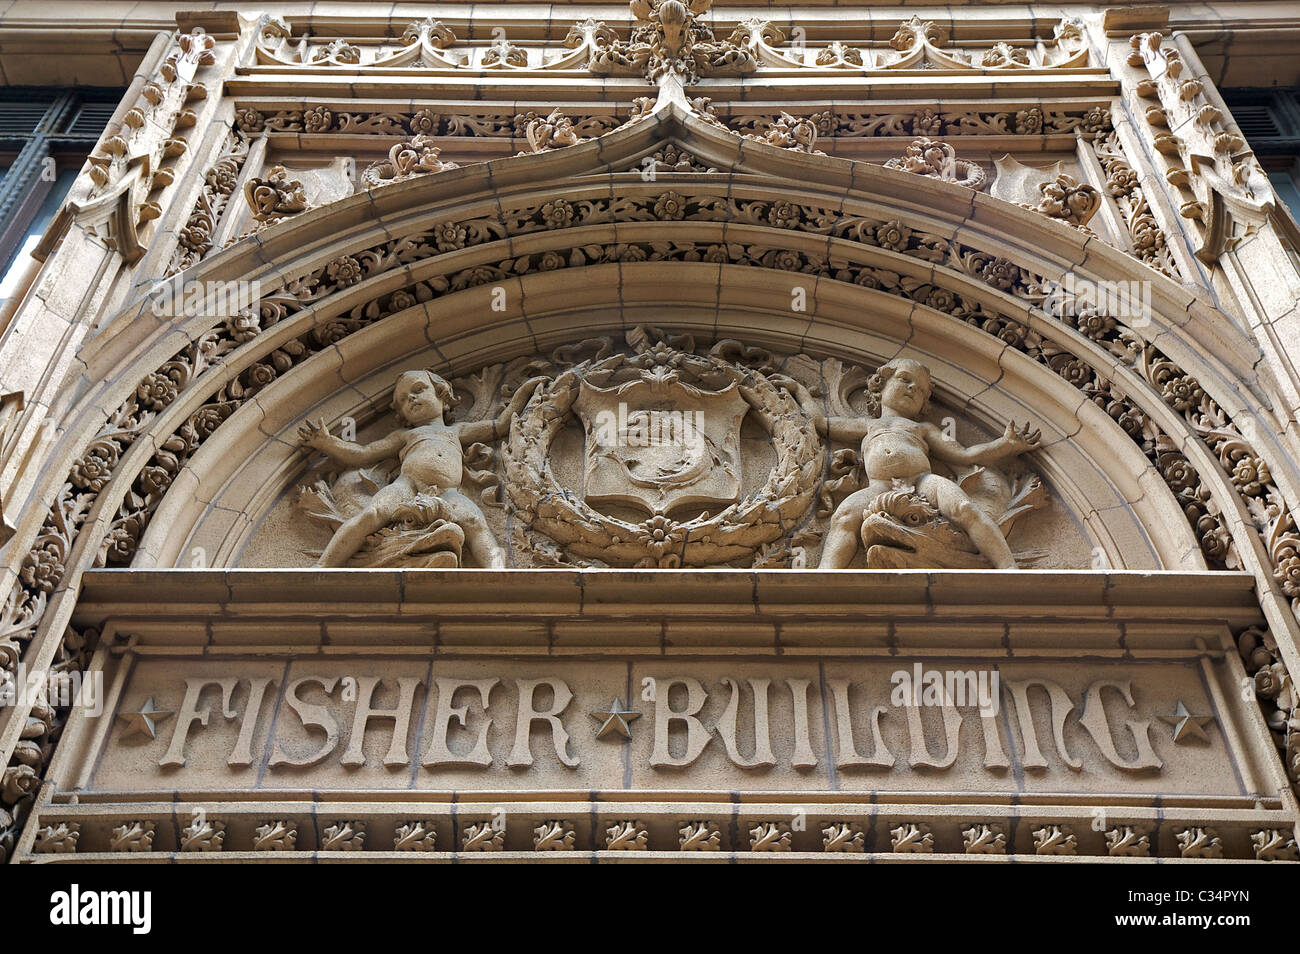 Detail of elaborate decorative work on Chicago's Fisher Building, designed by D.H. Burnham and Company and completed in 1906 Stock Photo